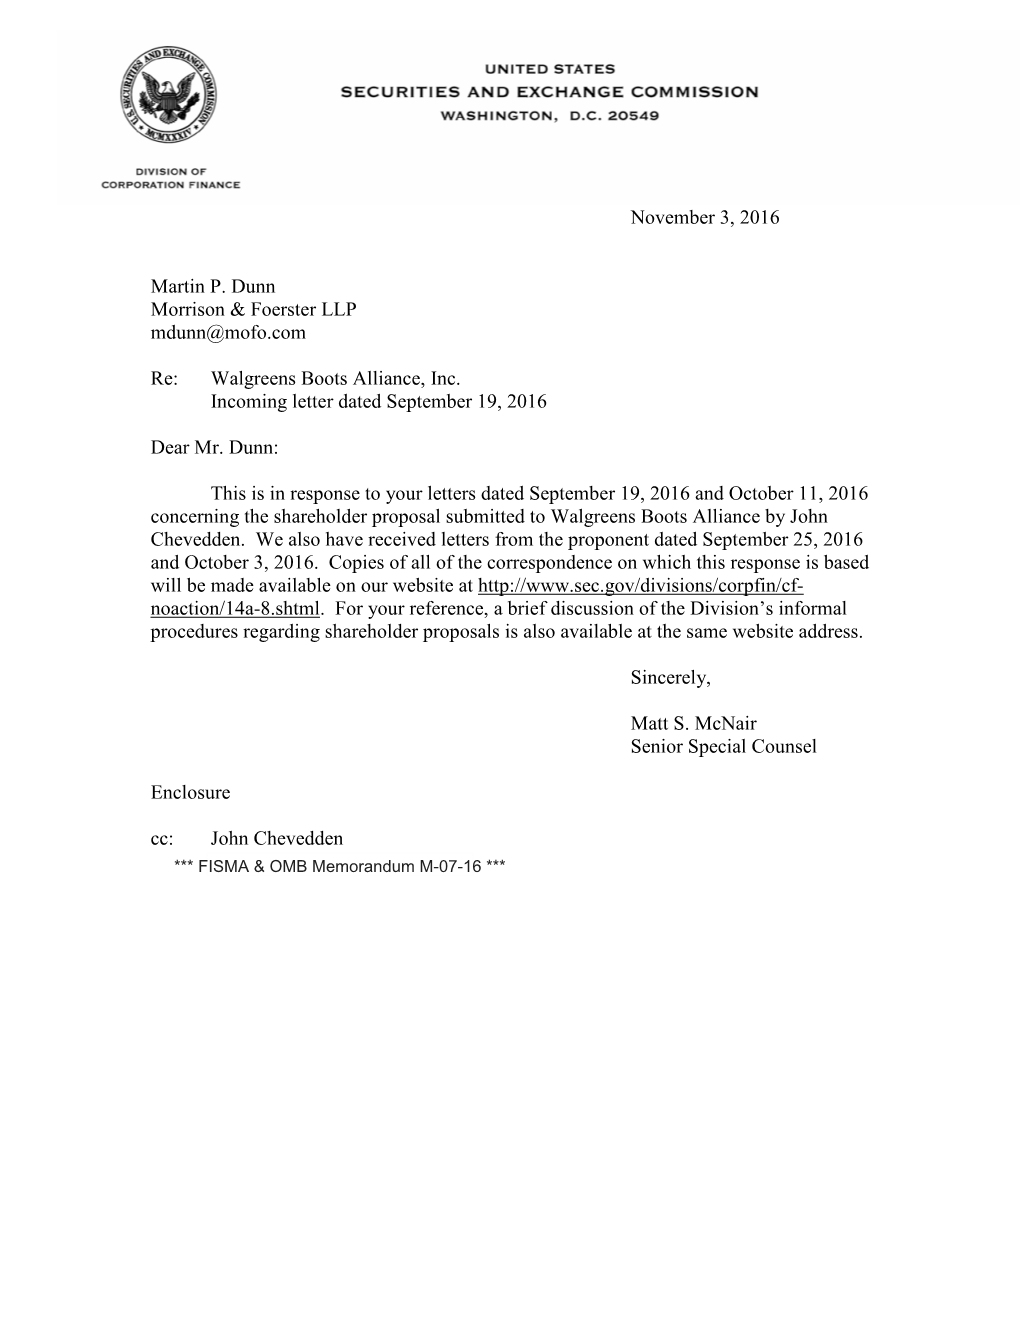 Walgreens Boots Alliance, Inc.; Rule 14A-8 No-Action Letter